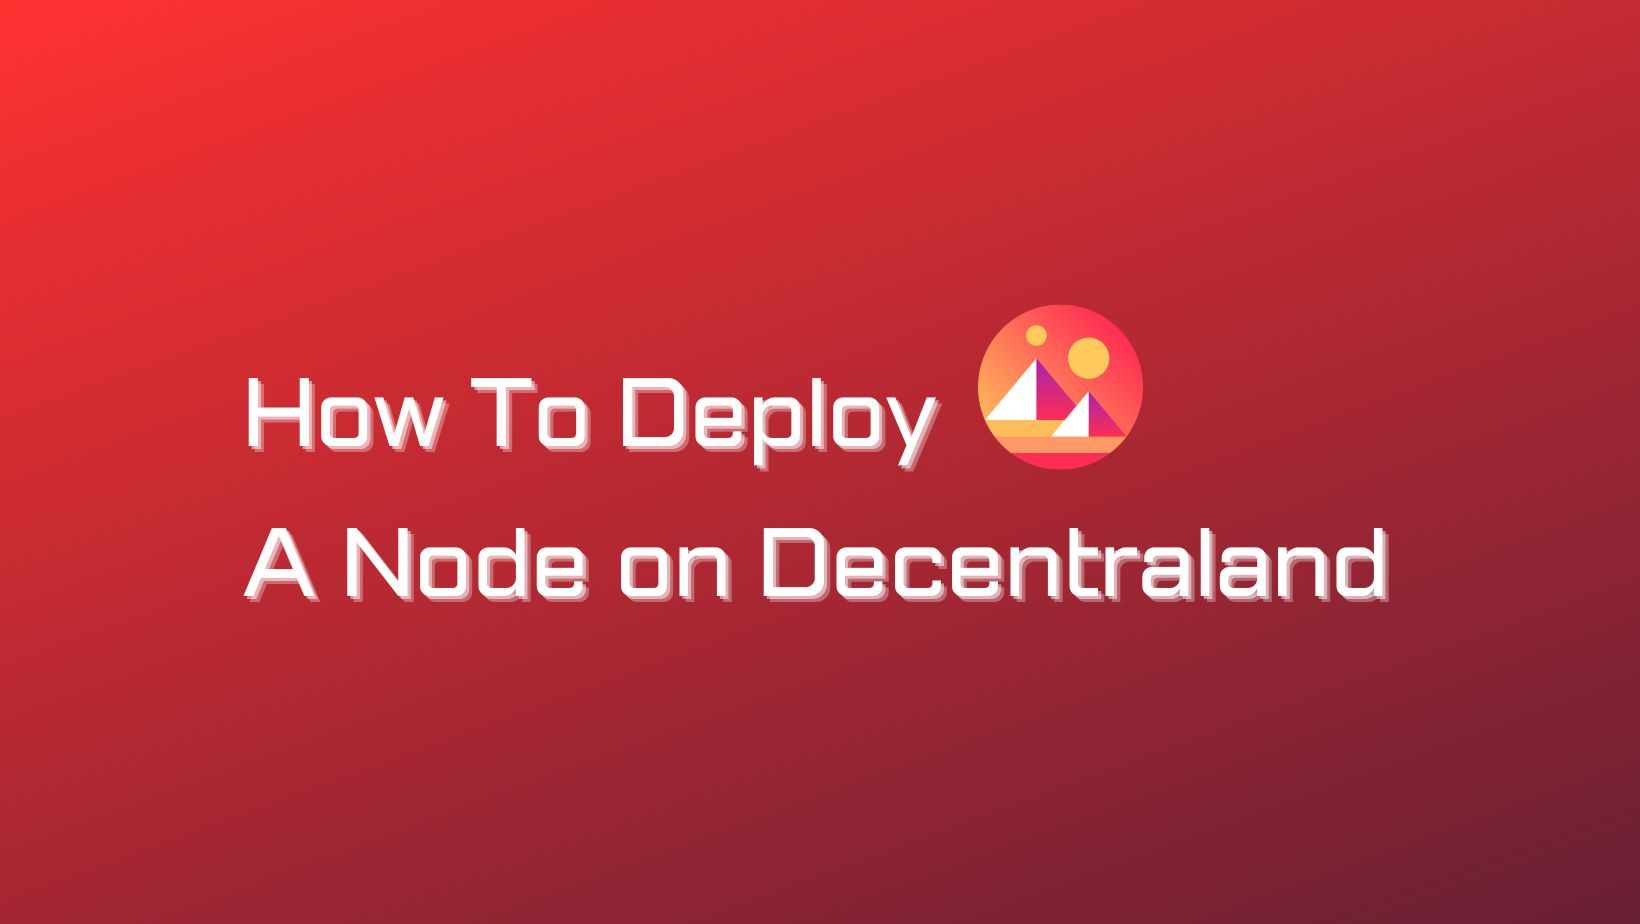 How to Deploy a Node on Decentraland